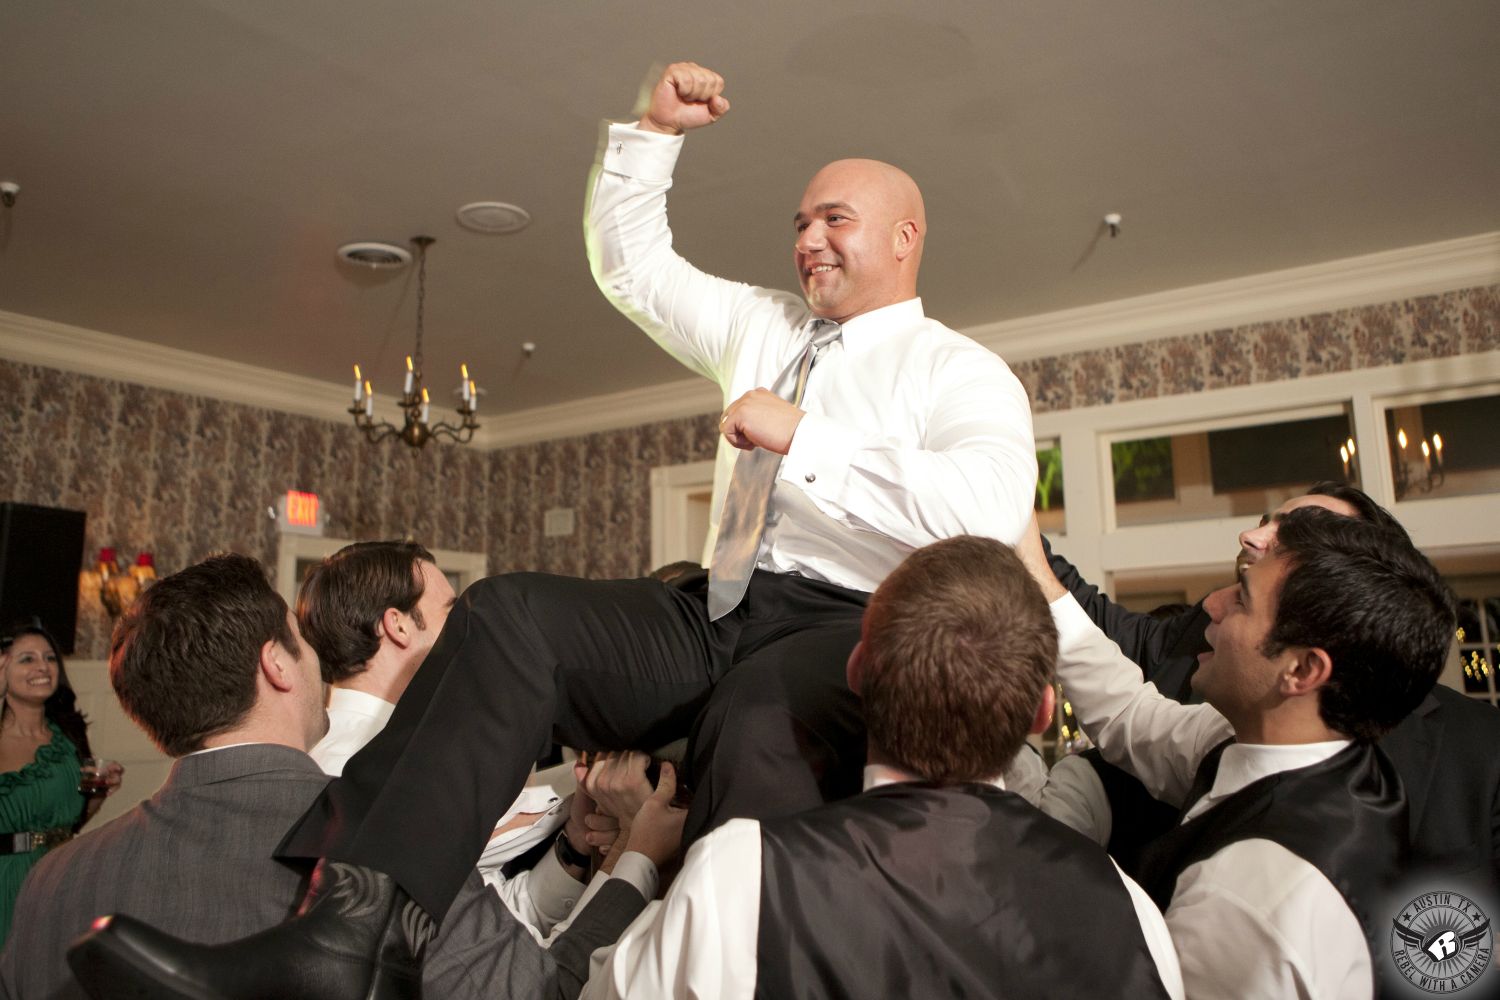 Groom with shaved head in white dress shirt and grey tie is lifted on the shoulders of the guests pumps fist in the air during the wedding reception at Green Pastures the wedding venue in South Austin.